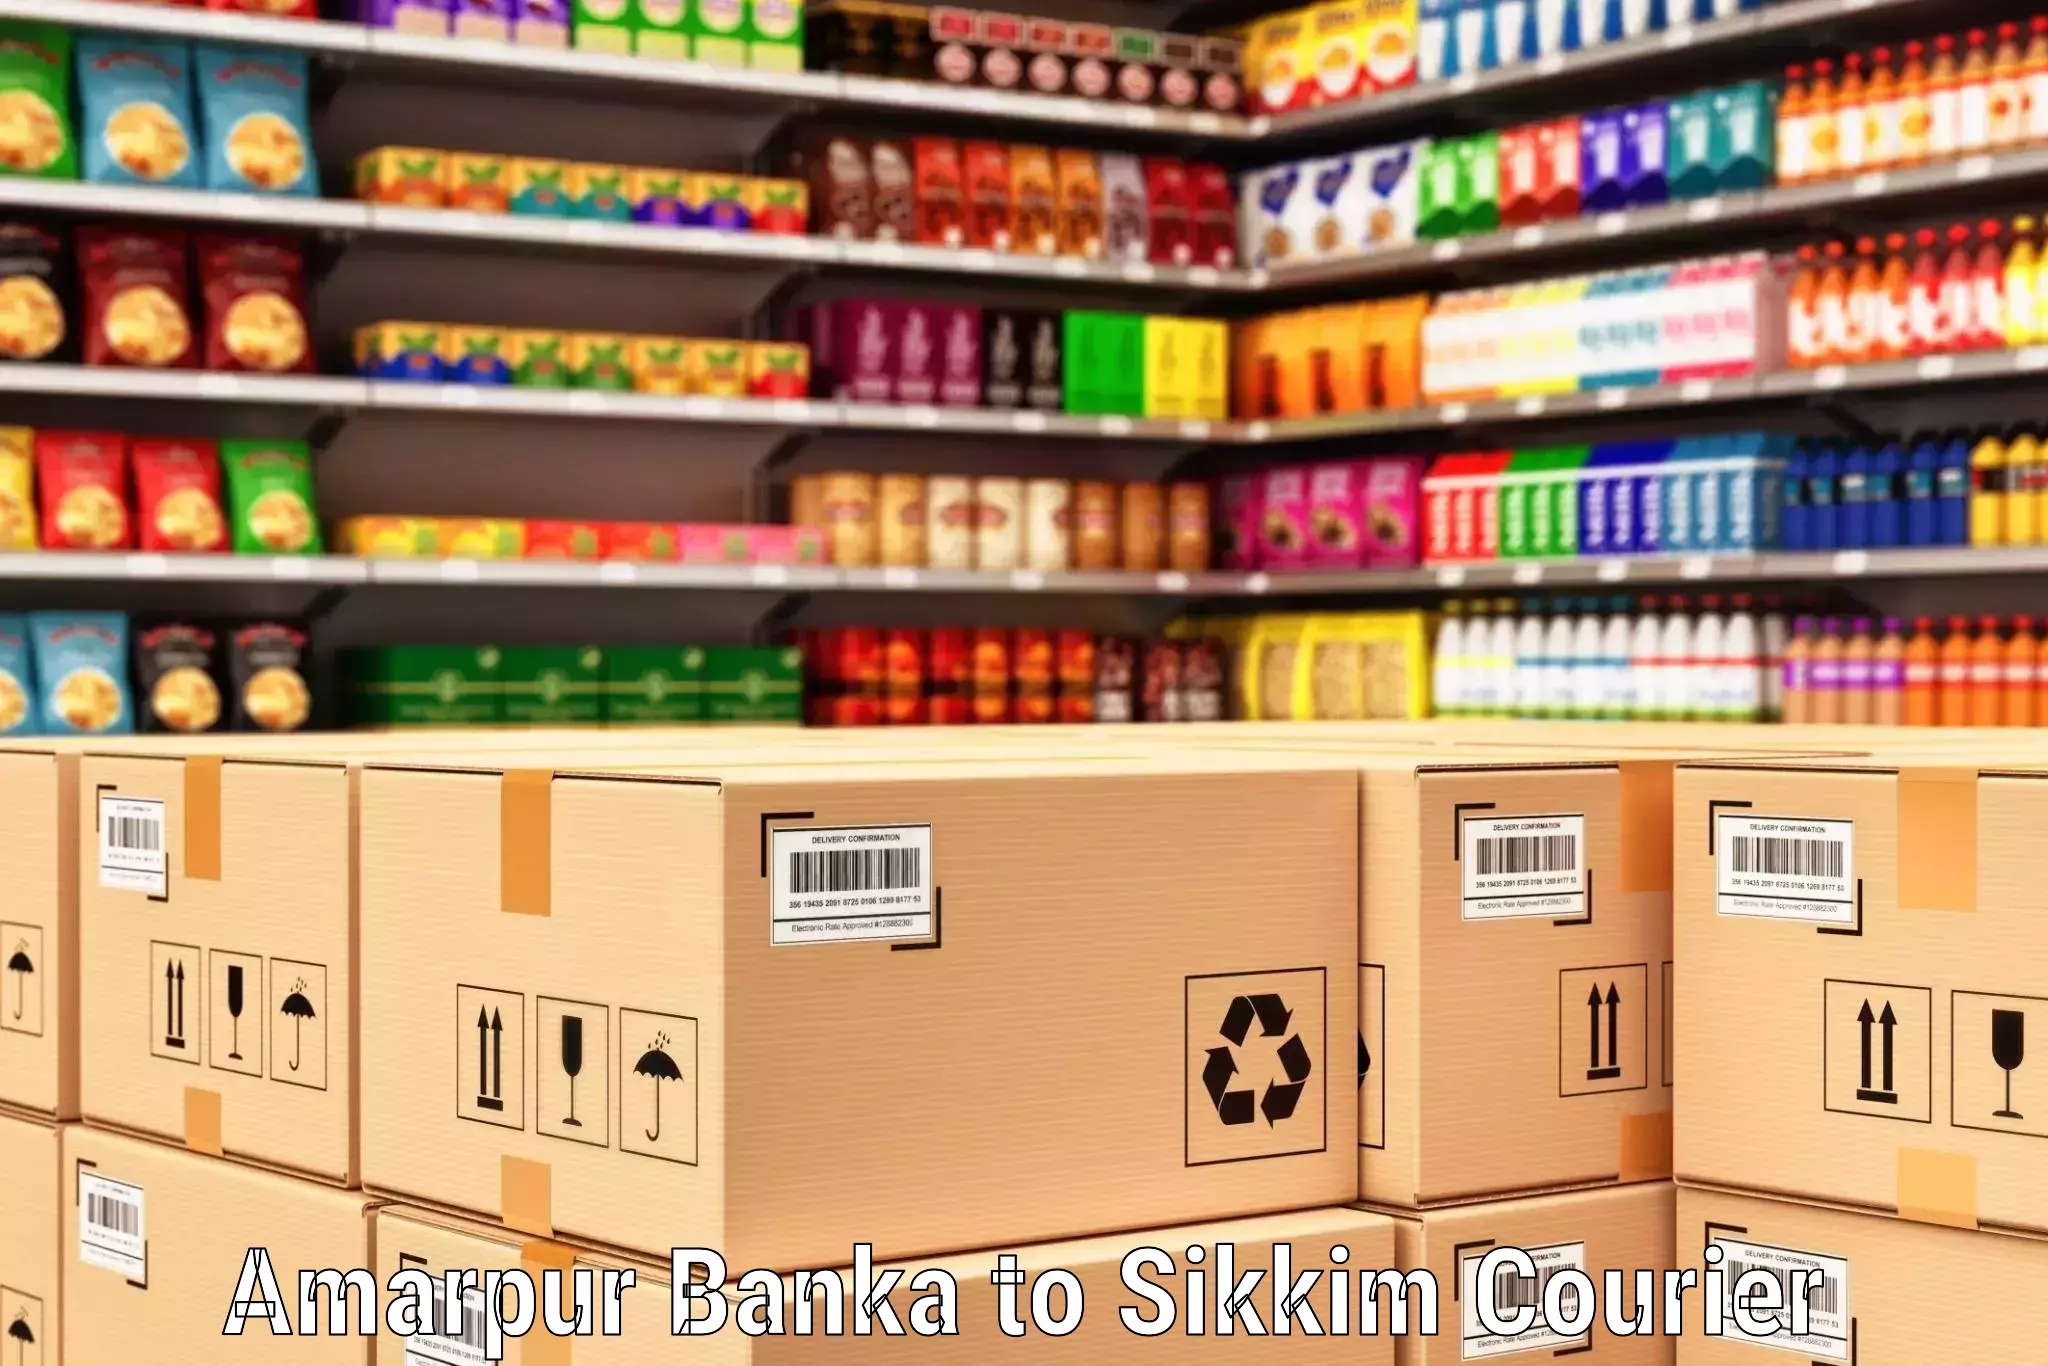 24/7 shipping services Amarpur Banka to Pelling